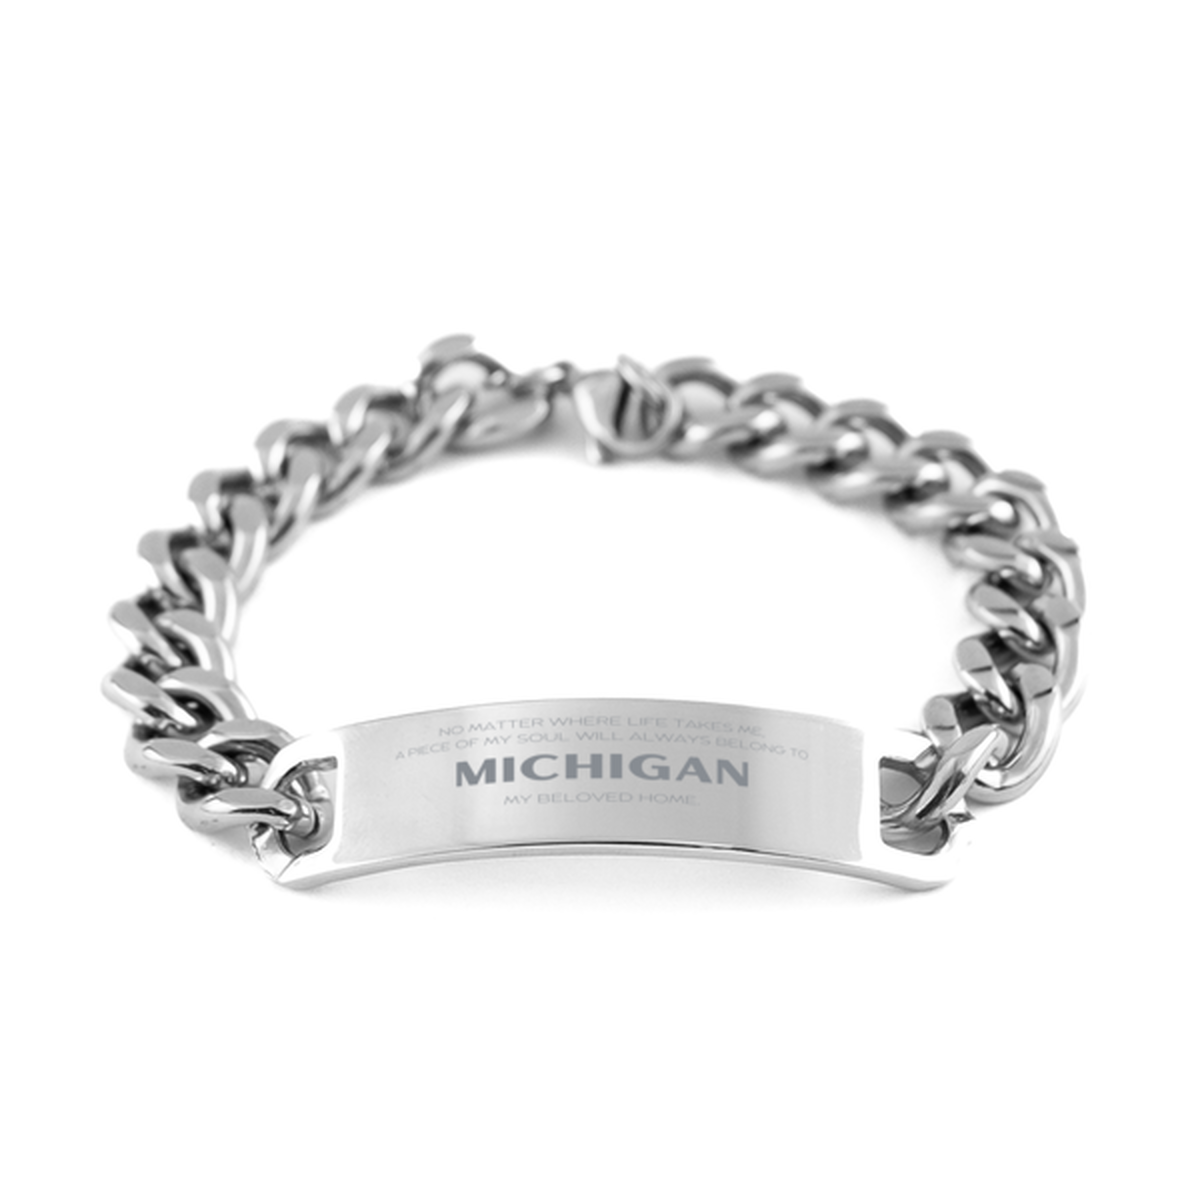 Love Michigan State Gifts, My soul will always belong to Michigan, Proud Cuban Chain Stainless Steel Bracelet, Birthday Unique Gifts For Michigan Men, Women, Friends